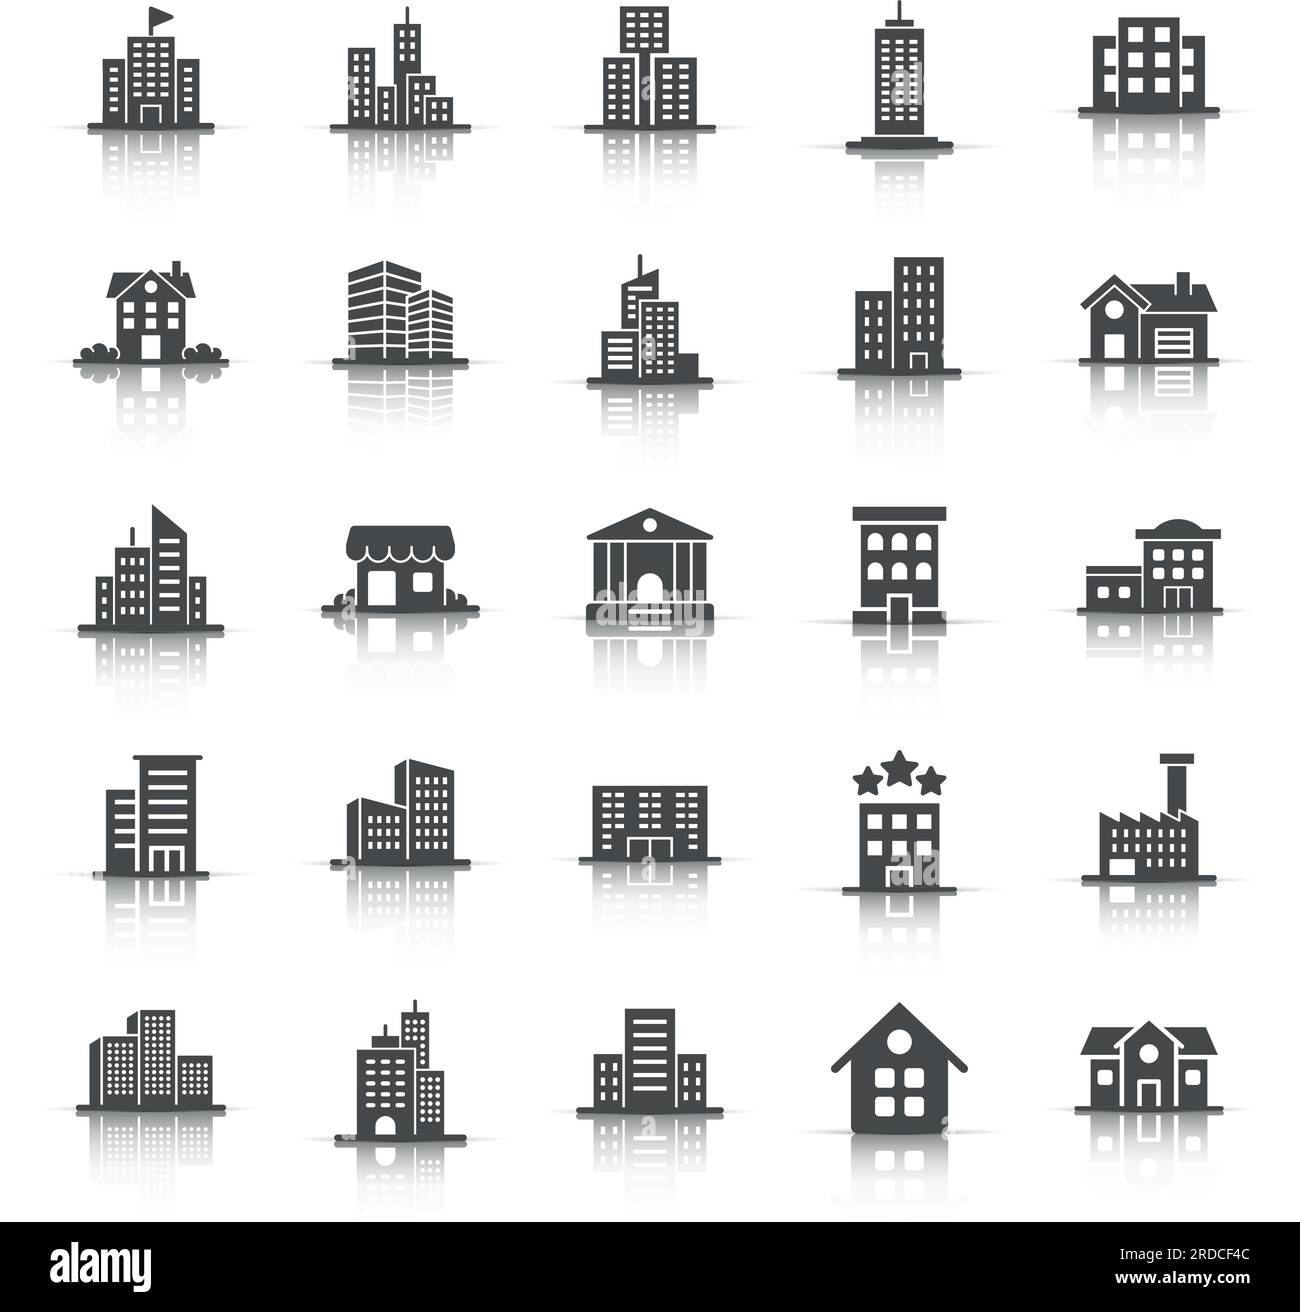 Building icon set in flat style. Town skyscraper apartment vector illustration on white isolated background. City tower business concept. Stock Vector